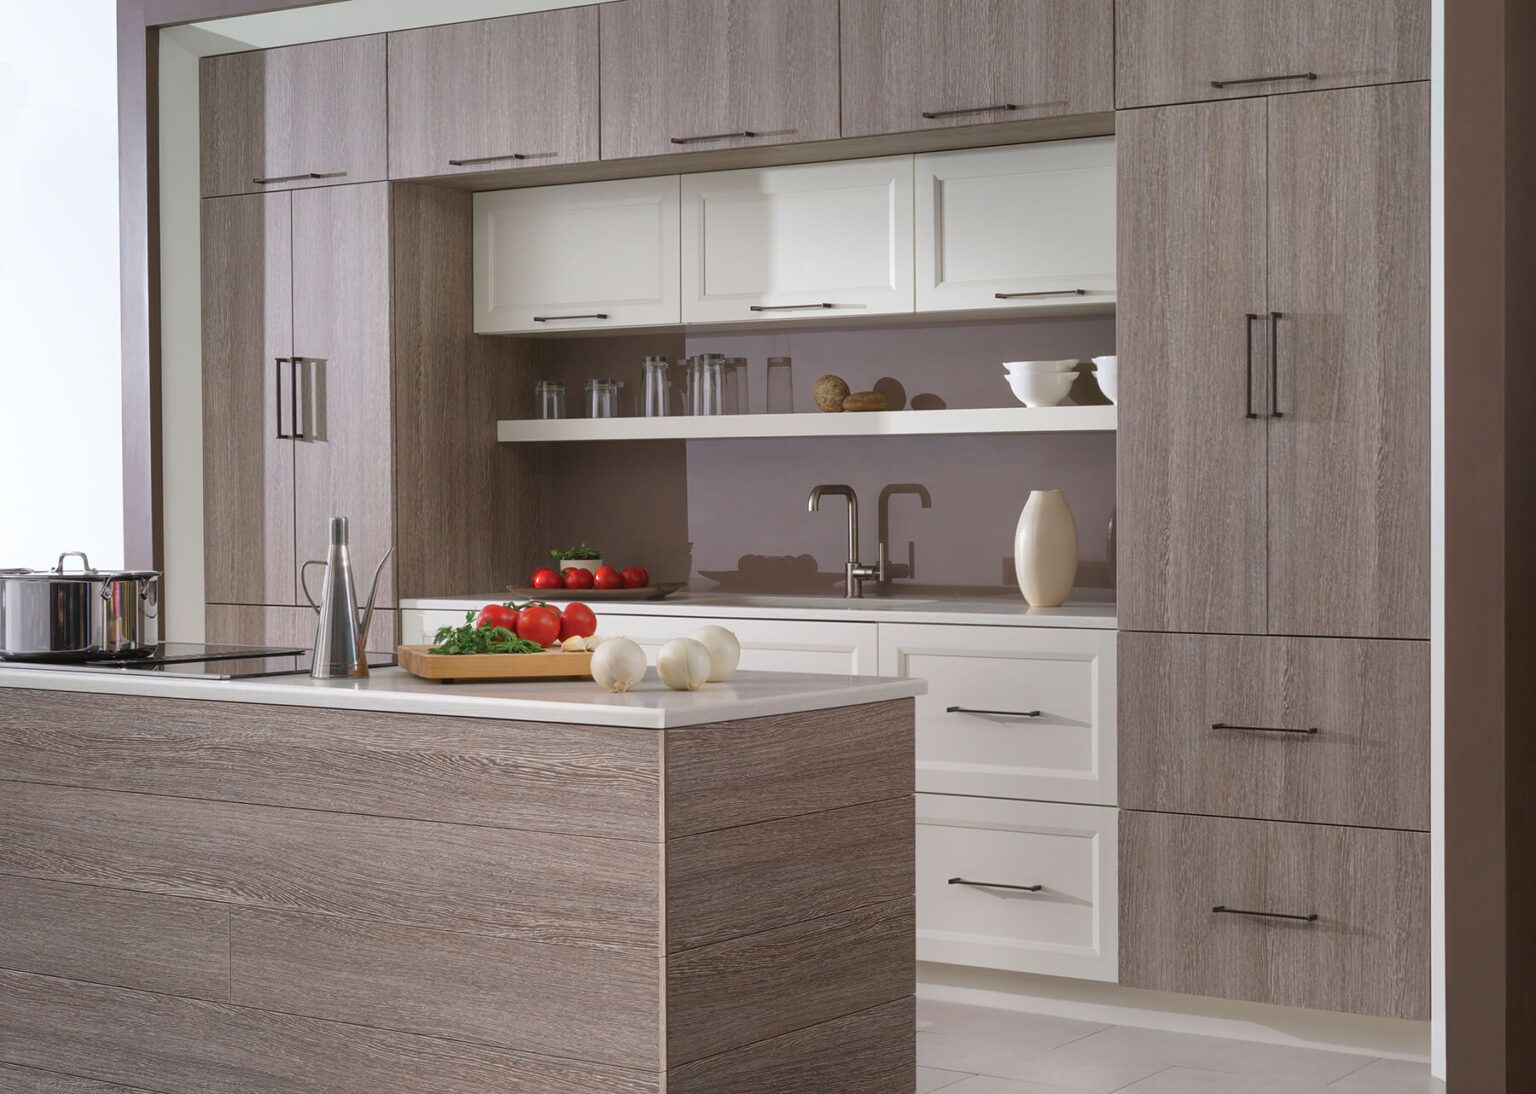 Laminate Kitchen Cabinets And Countertops 1536x1094 